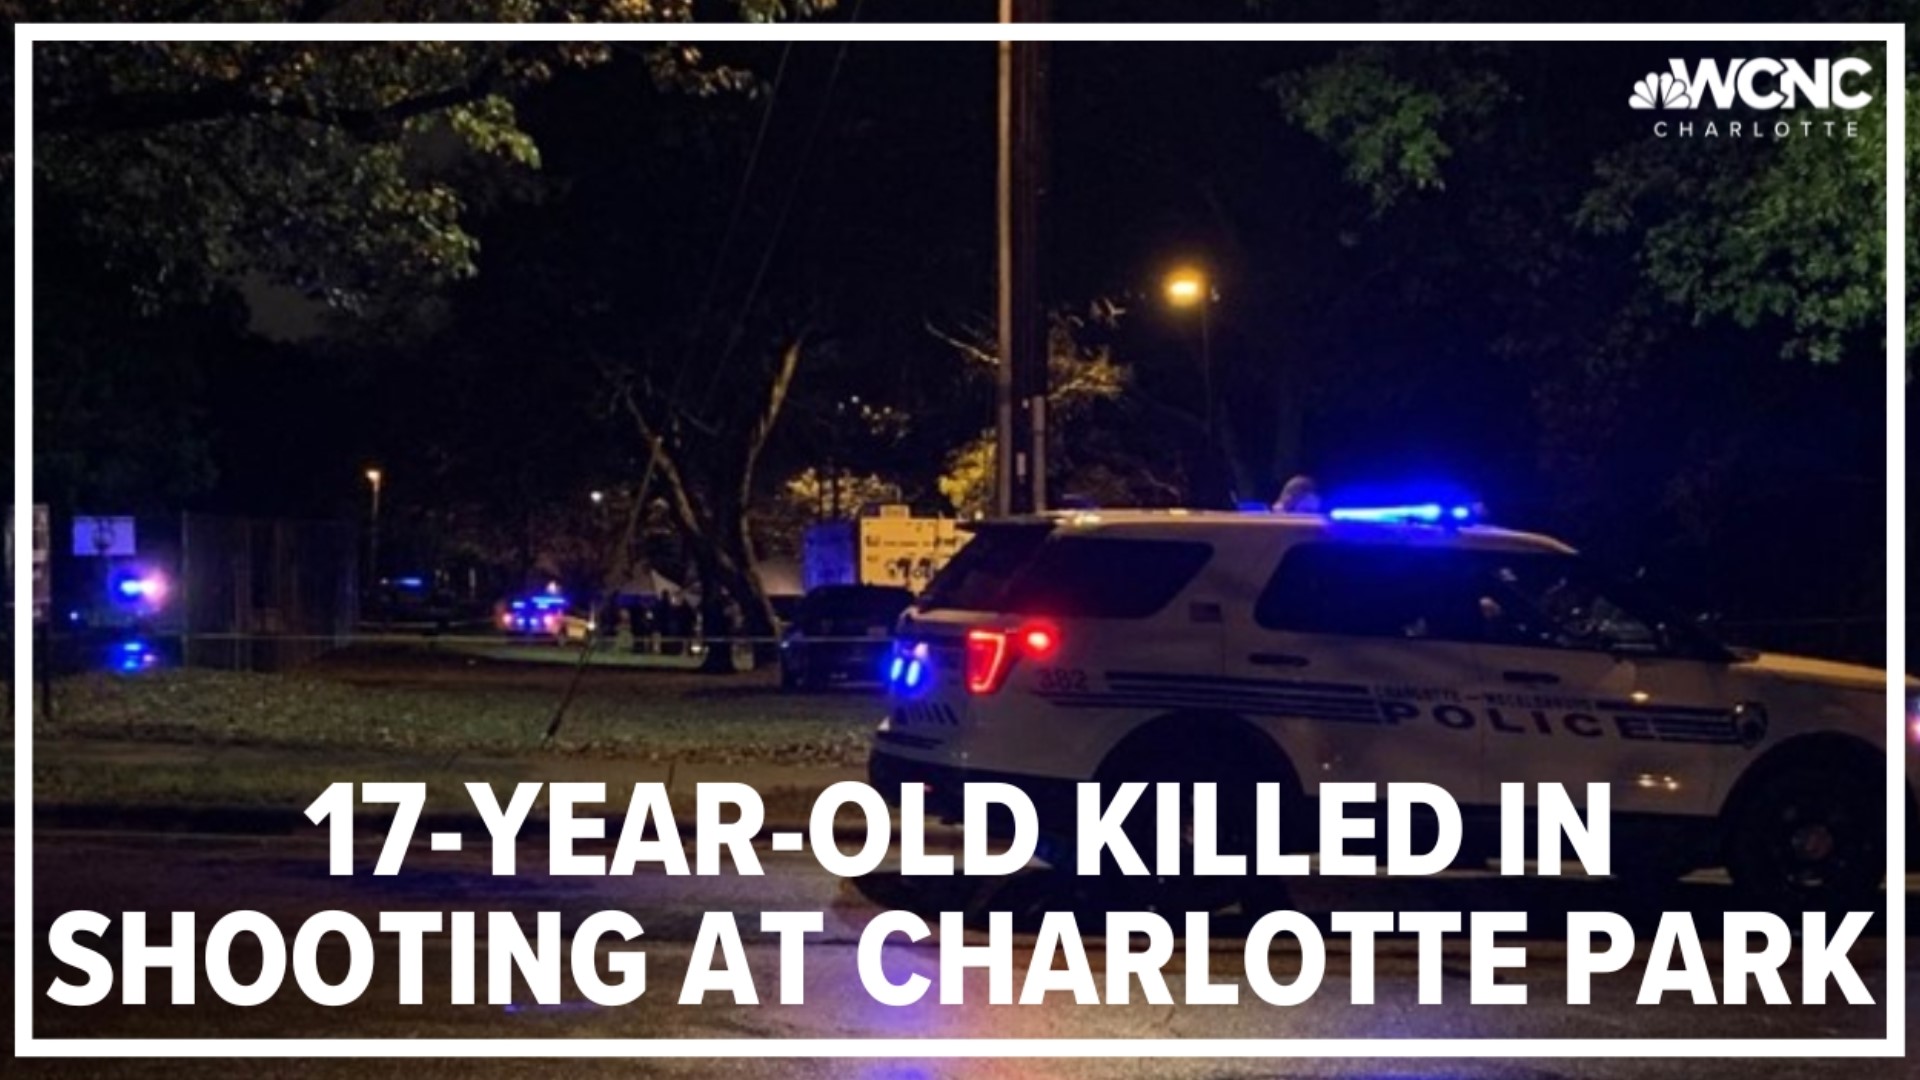 A 17-year-old boy was killed in a double shooting at Fred Alexander Park on Griers Grove Road in north Charlotte Tuesday night, police said.